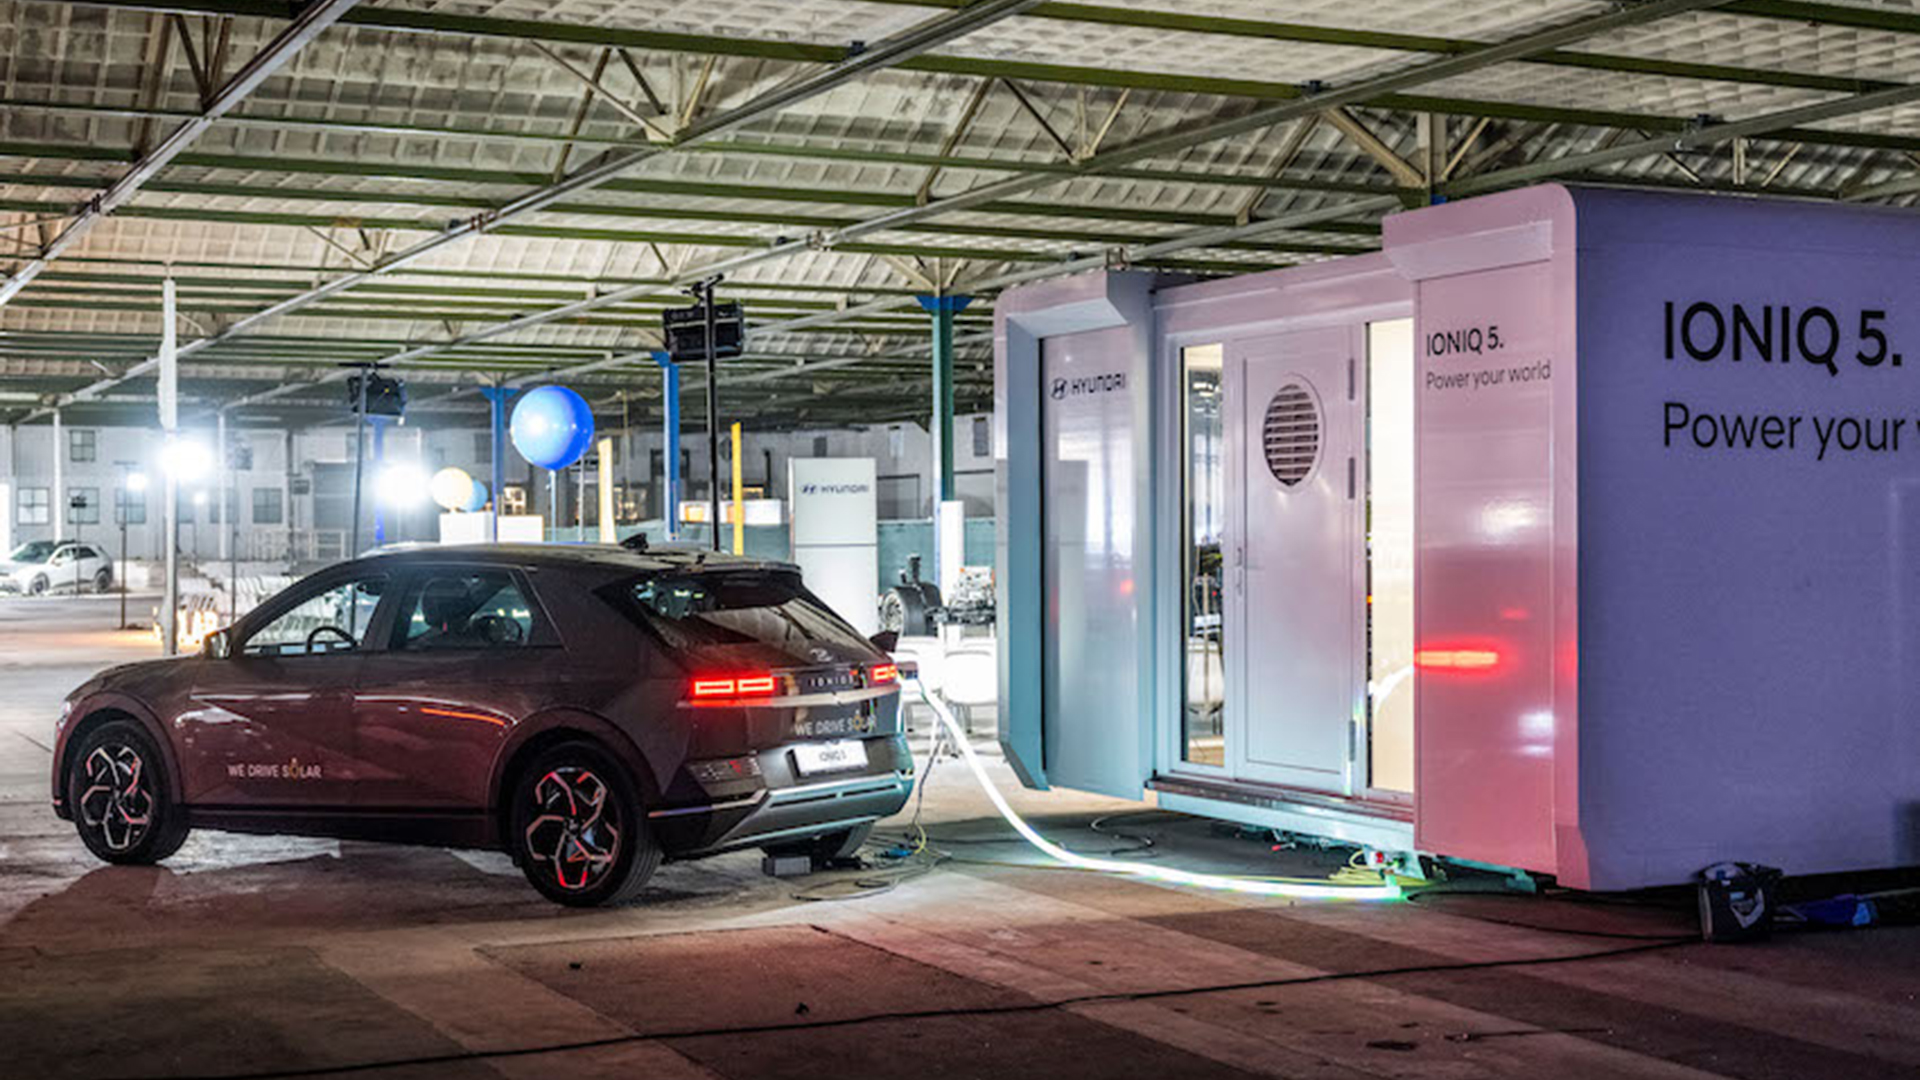 An electric car connected to the network does not mean that the battery is being recharged.  With this technology, the car can supply energy for people's houses